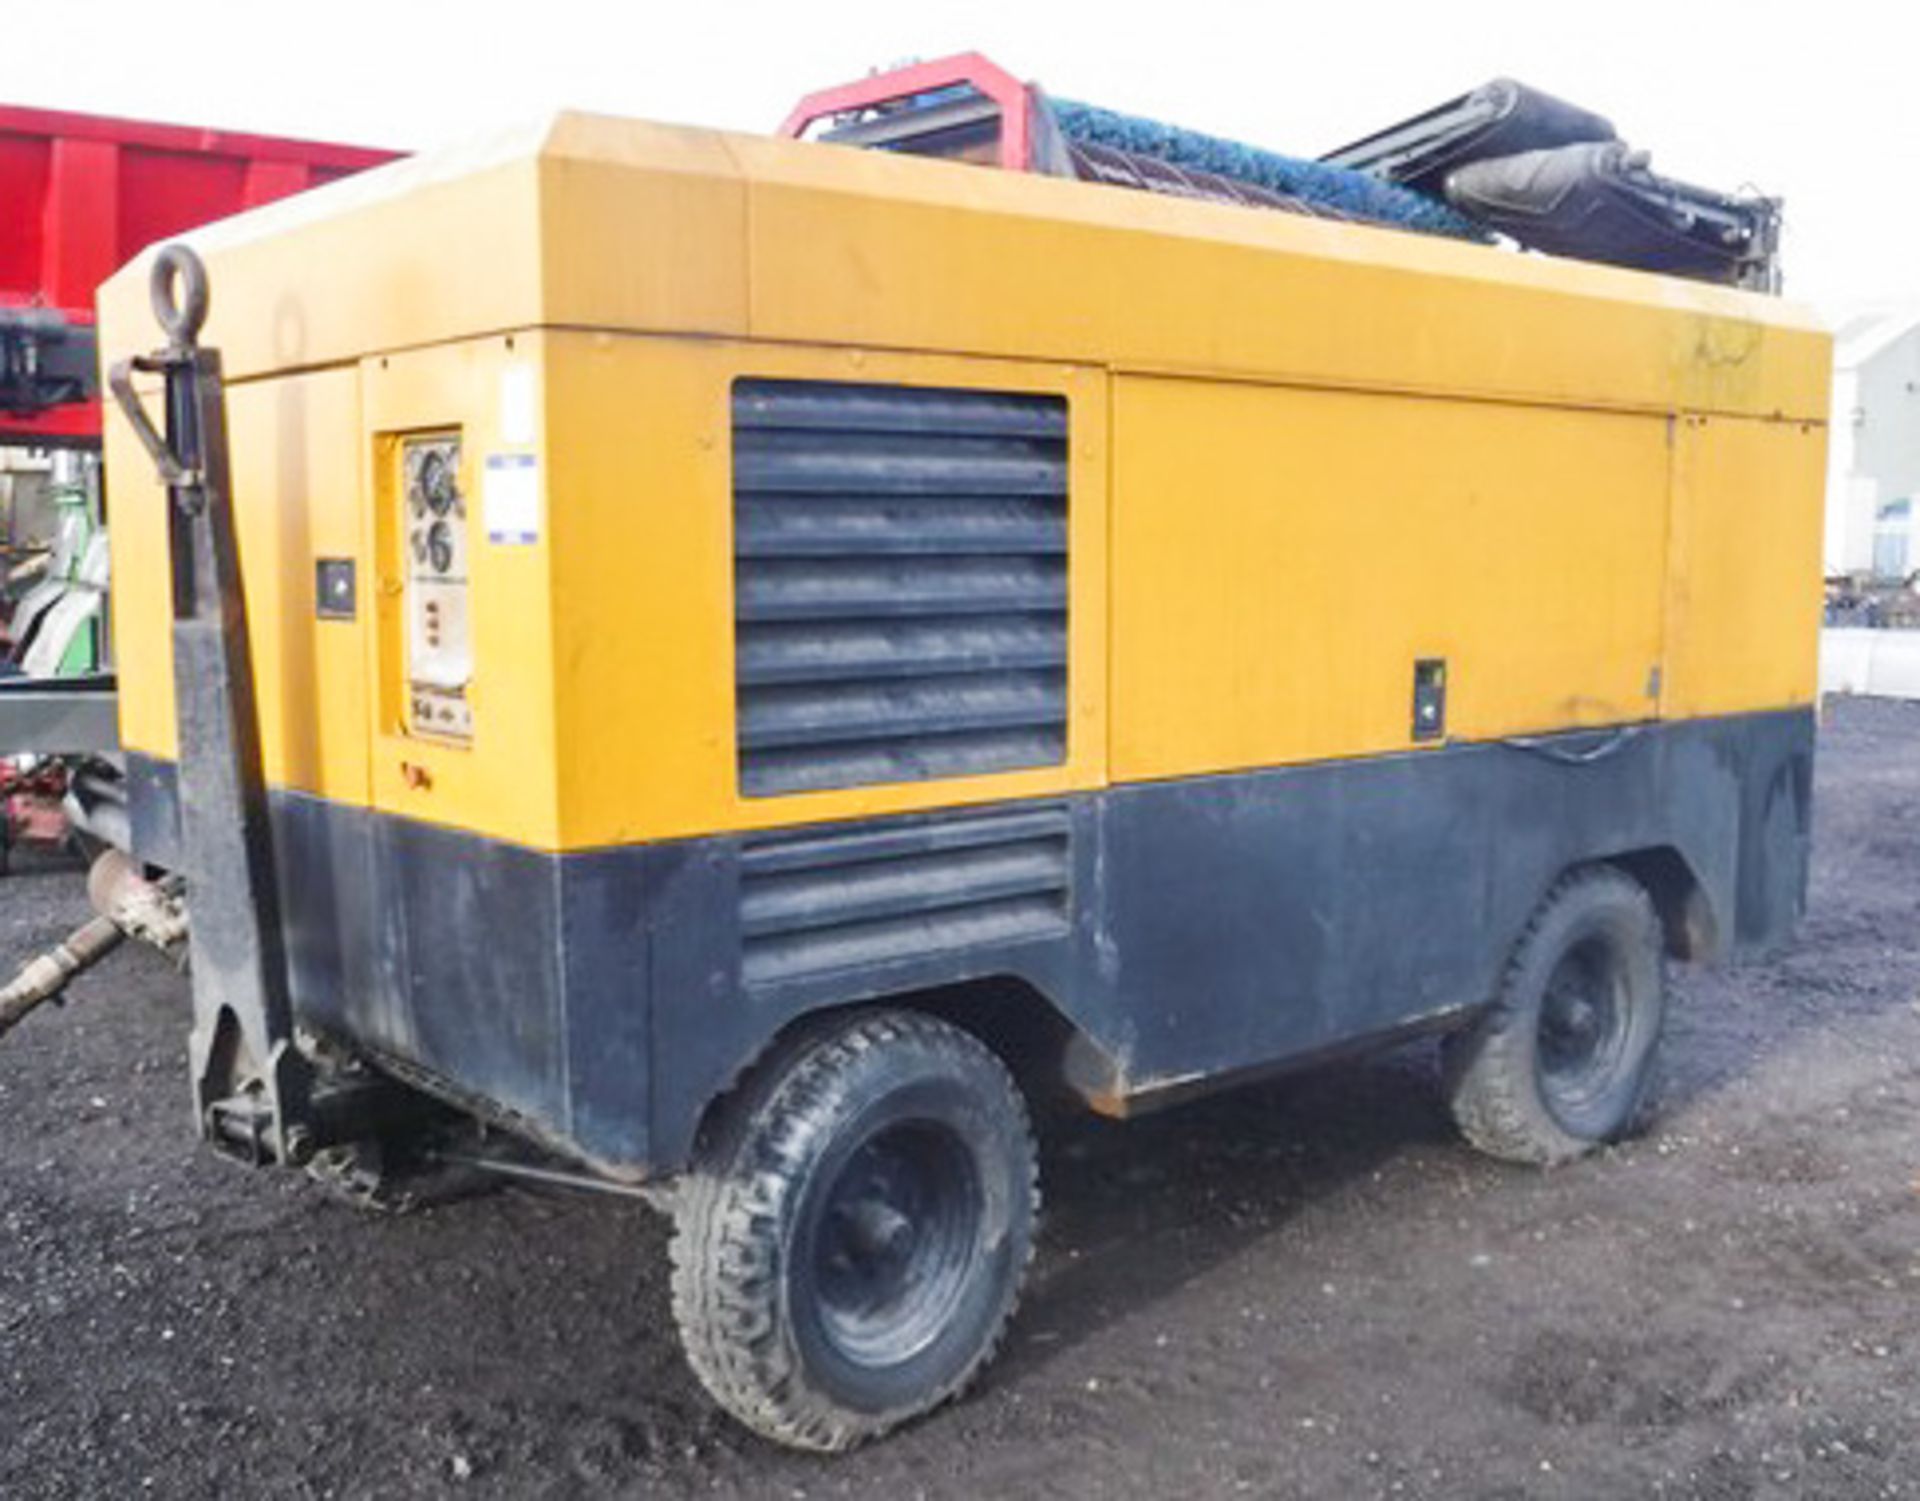 2000 INGERSOLL RAND TOWABLE COMPRESSOR MODEL 12/235 WEC. CODE 094. MAX PRESSURE 138 BAR. FITTED WITH